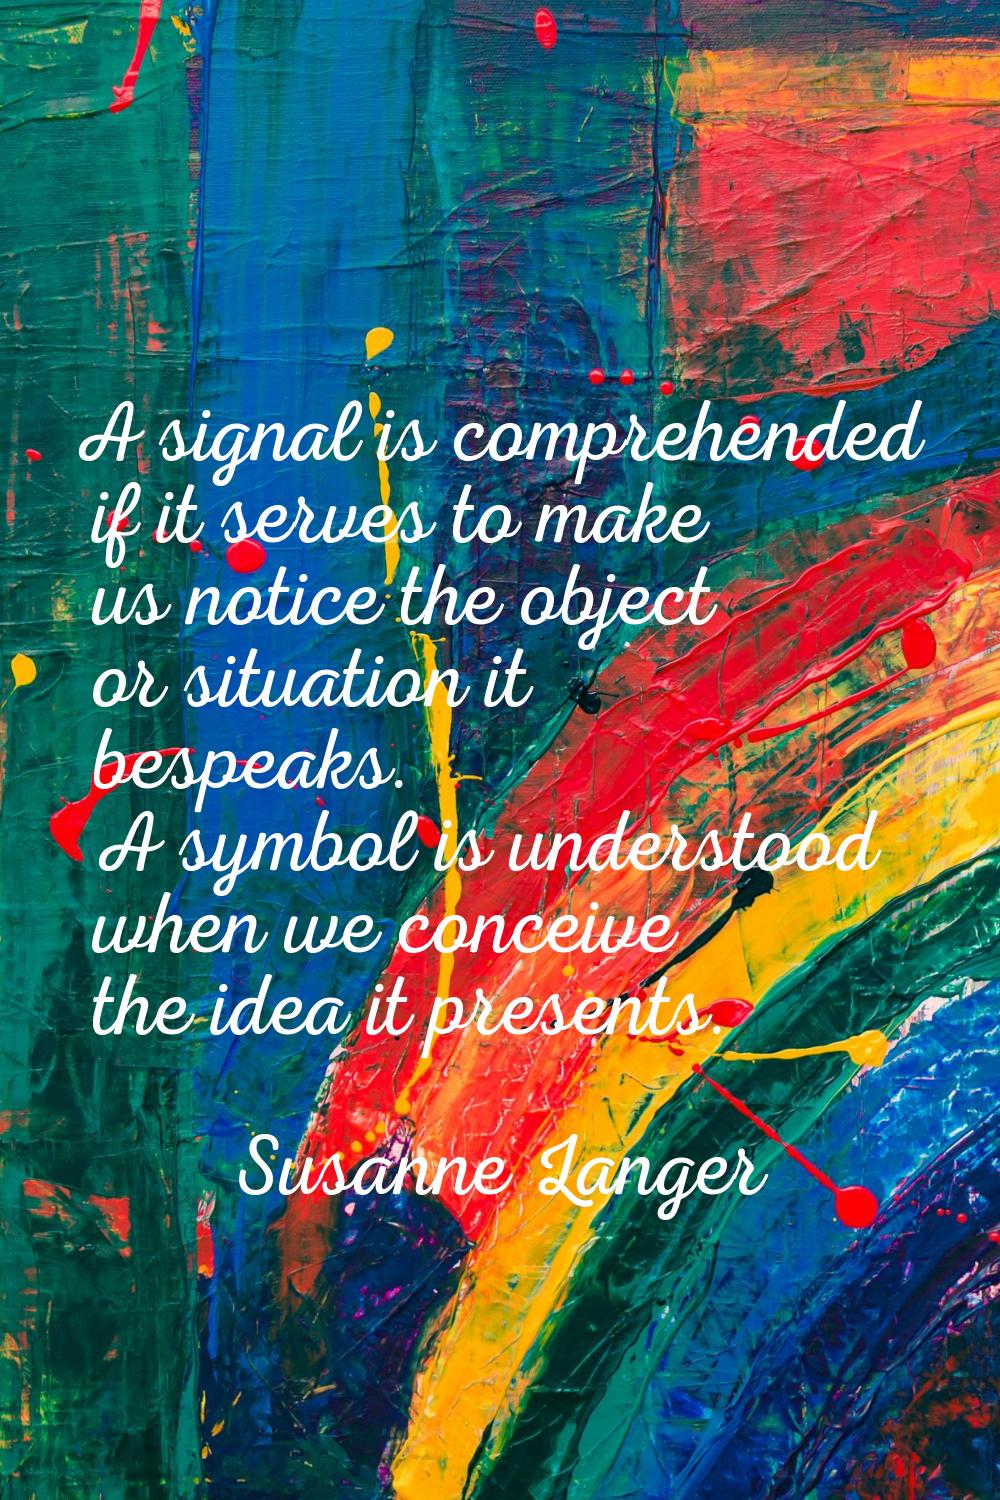 A signal is comprehended if it serves to make us notice the object or situation it bespeaks. A symb